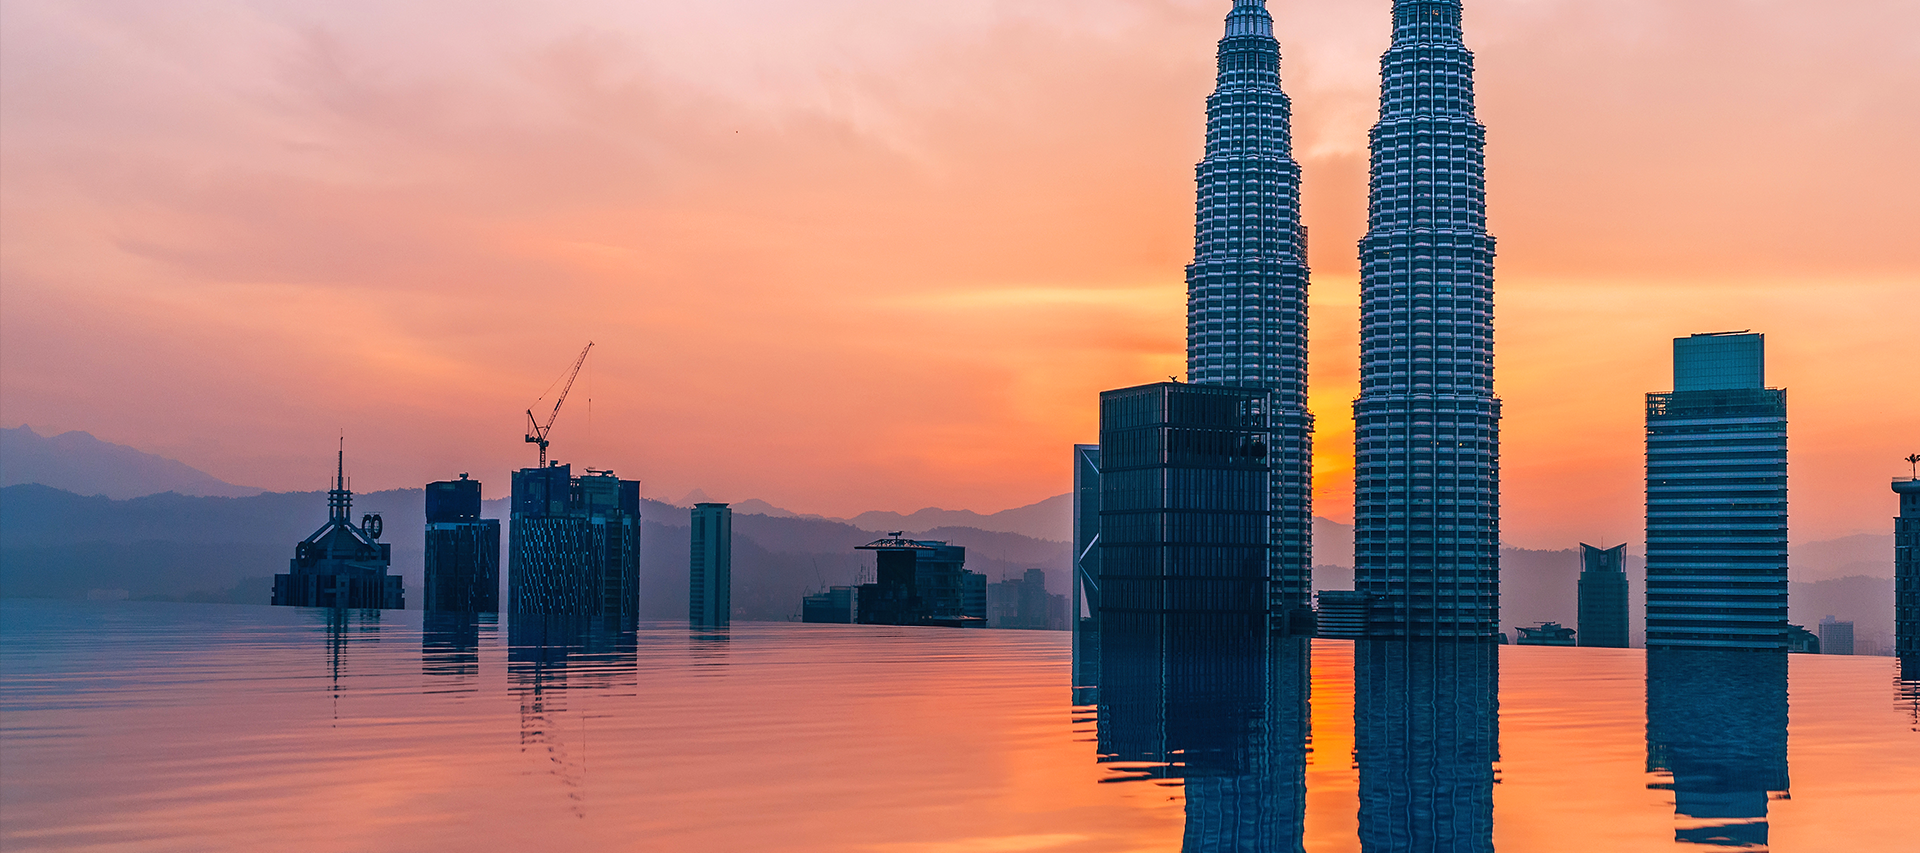 A shot of an infinity pool with the Petronas Twin Towers and other buildings in the background during sunset